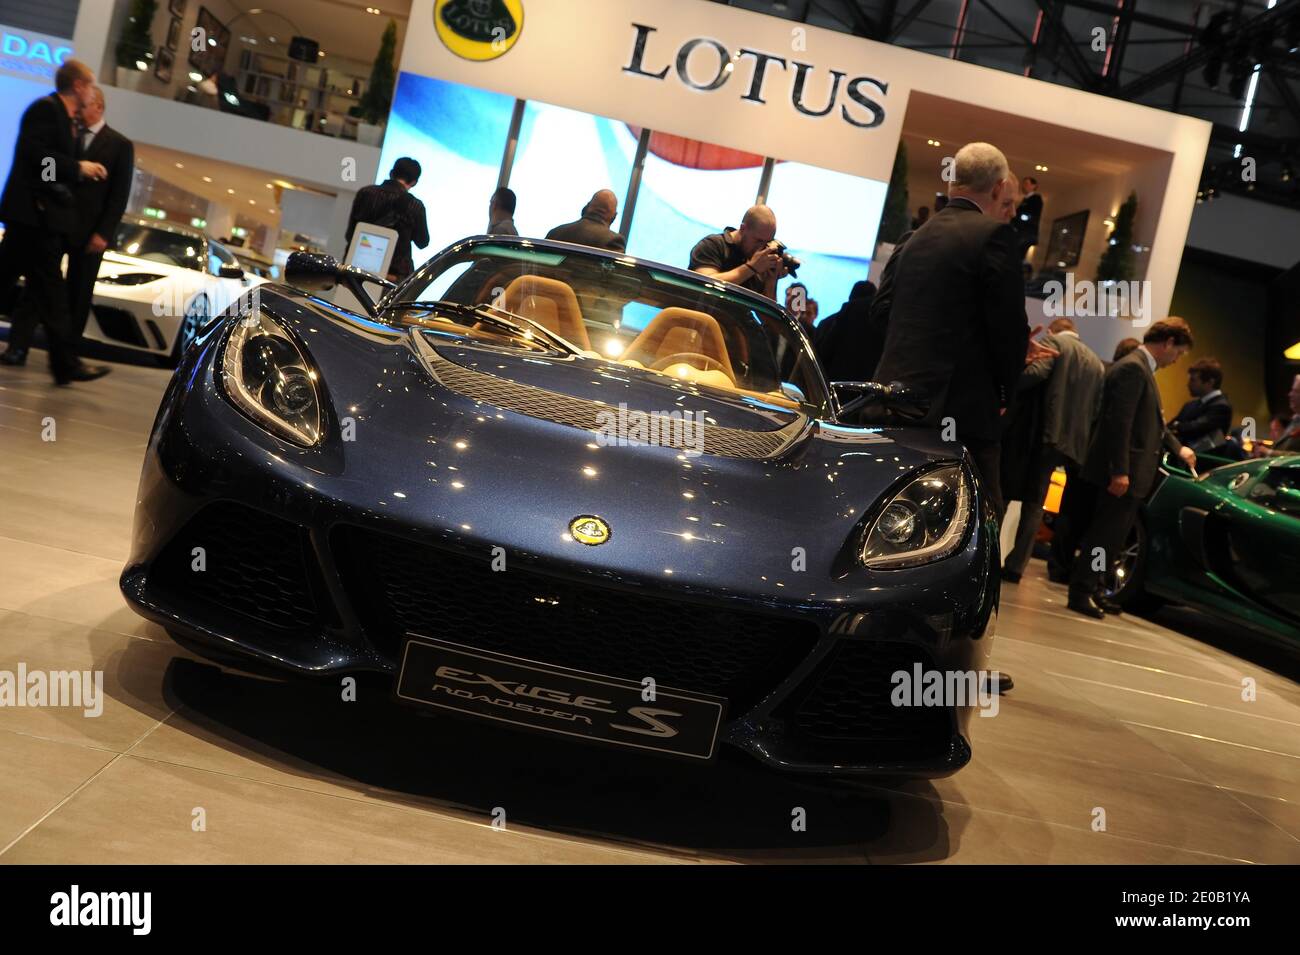 Lotus Exige S Roadster on display at the 82nd International Motor Show and  Accessories of Geneva, Switzerland on March 7, 2012. Photo by  Loona/ABACAPRESS.COM Stock Photo - Alamy